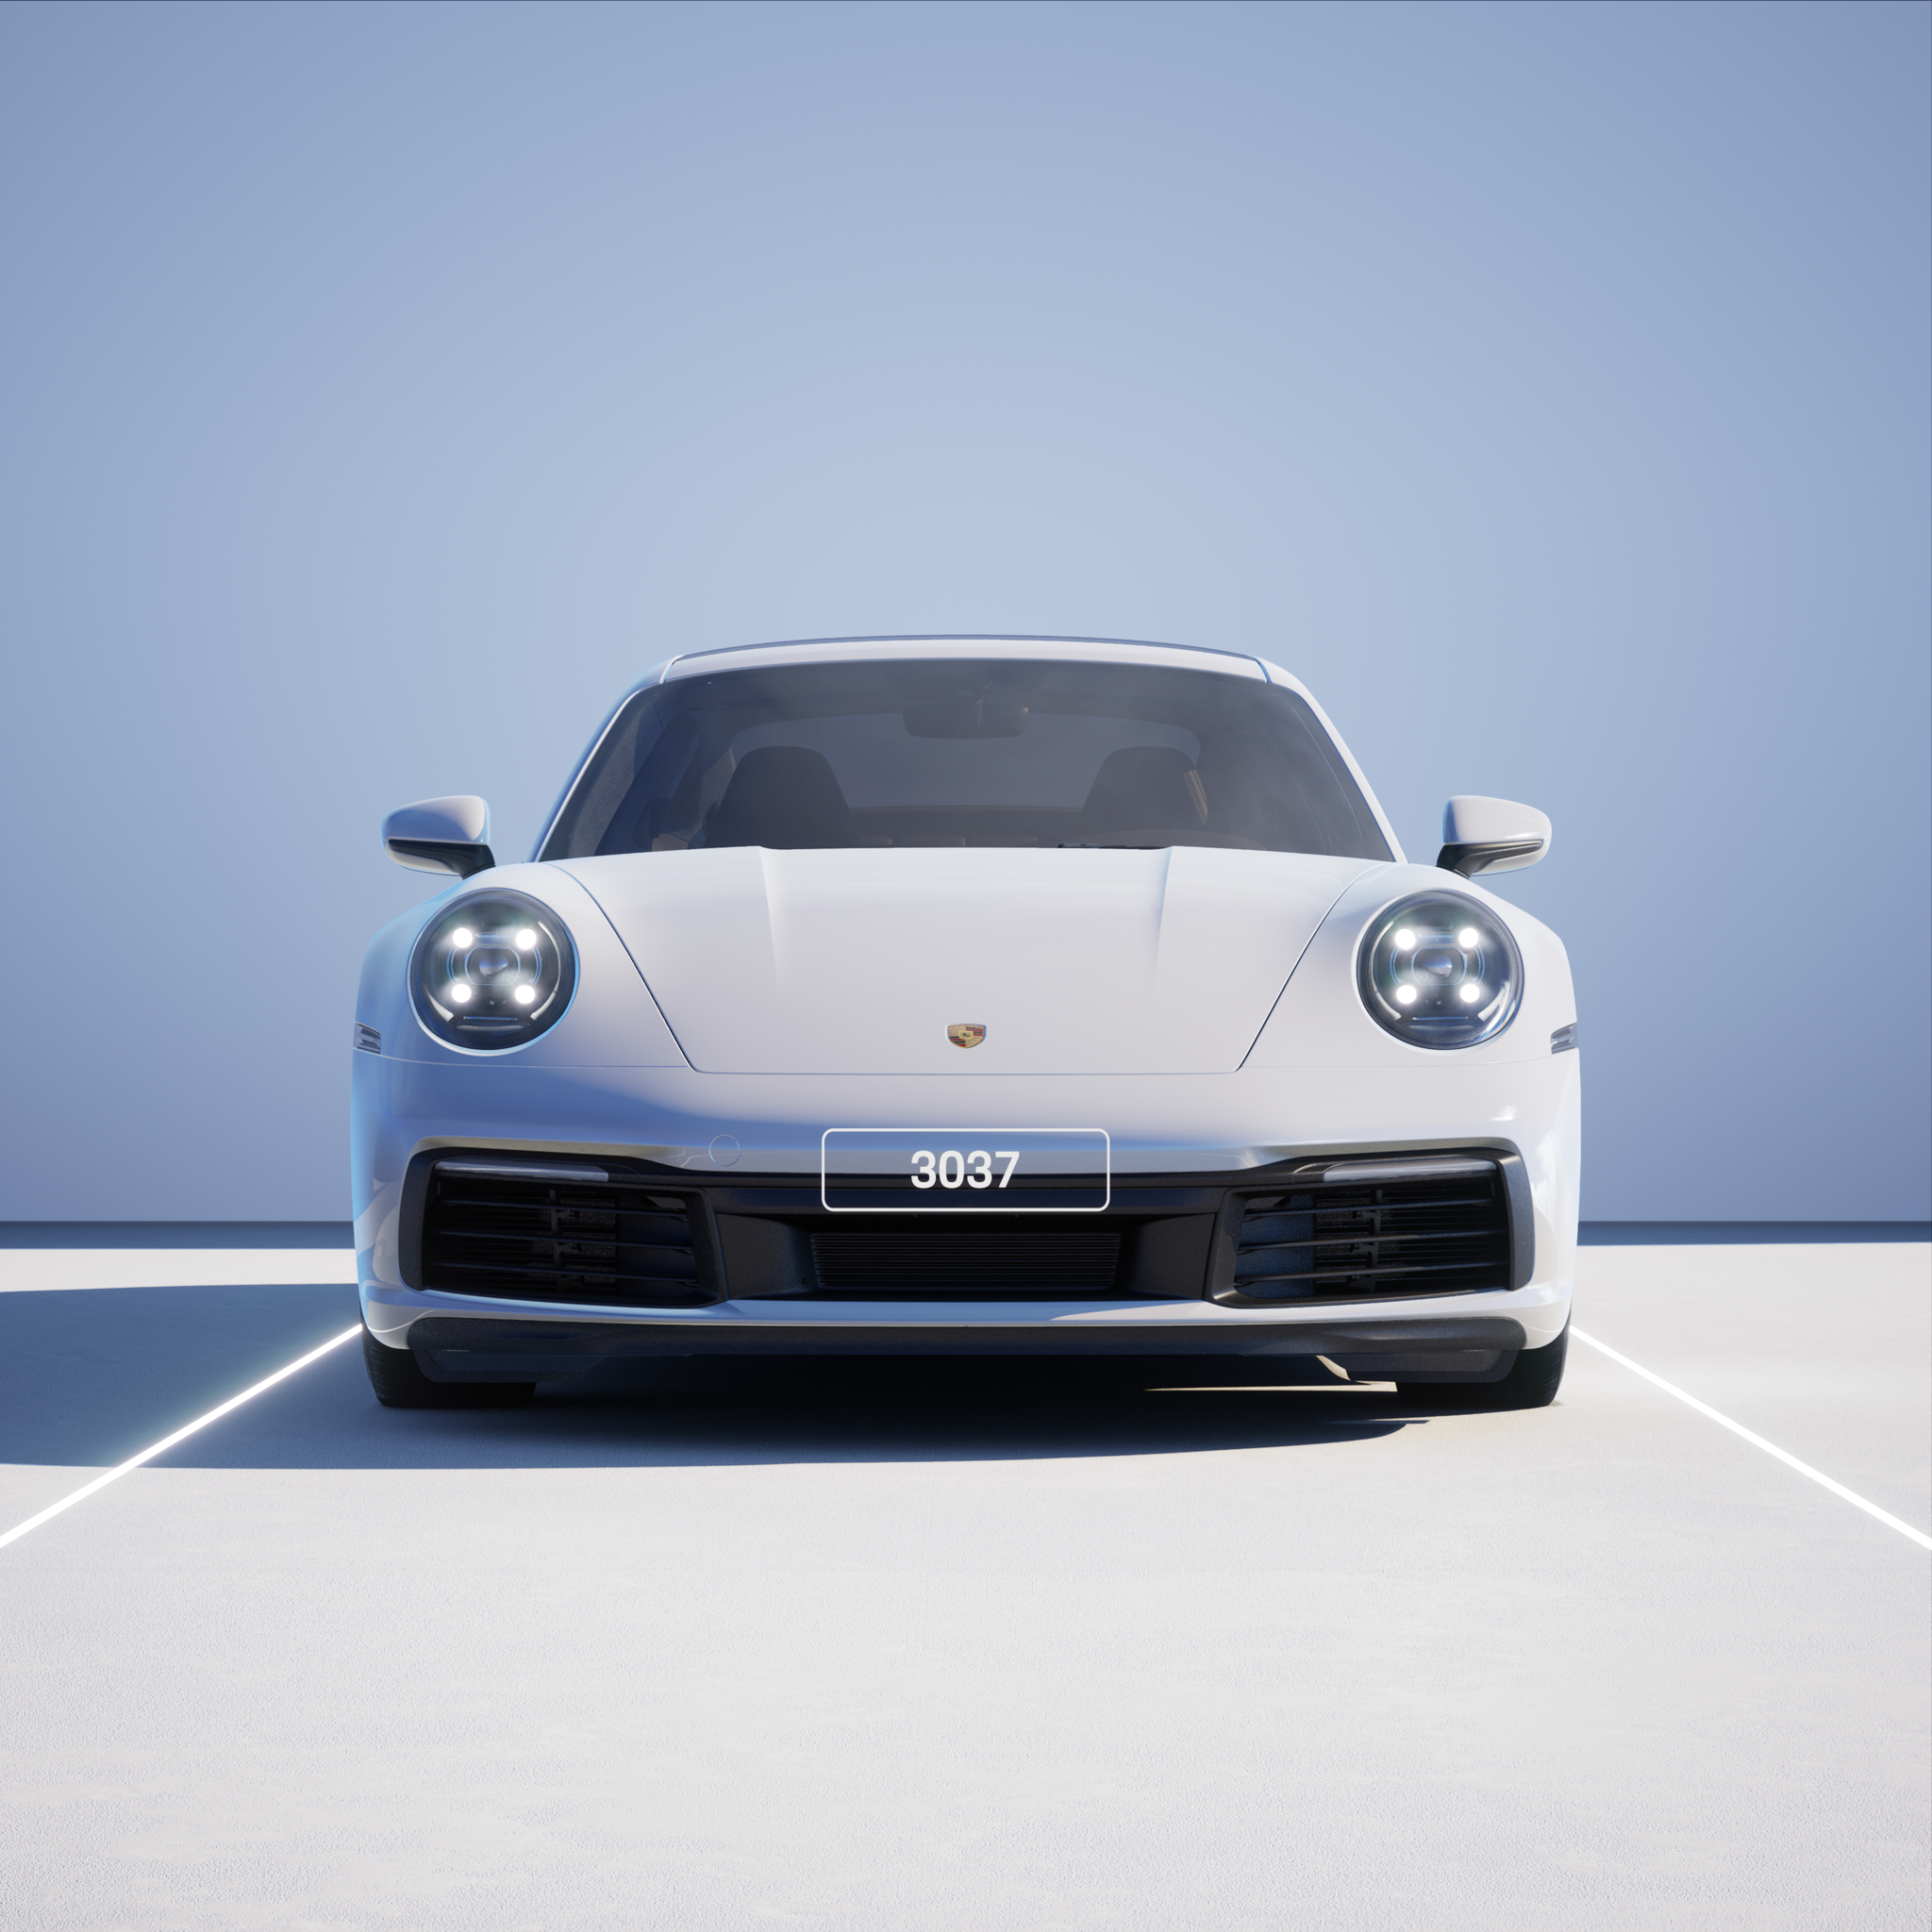 The PORSCHΞ 911 3037 image in phase